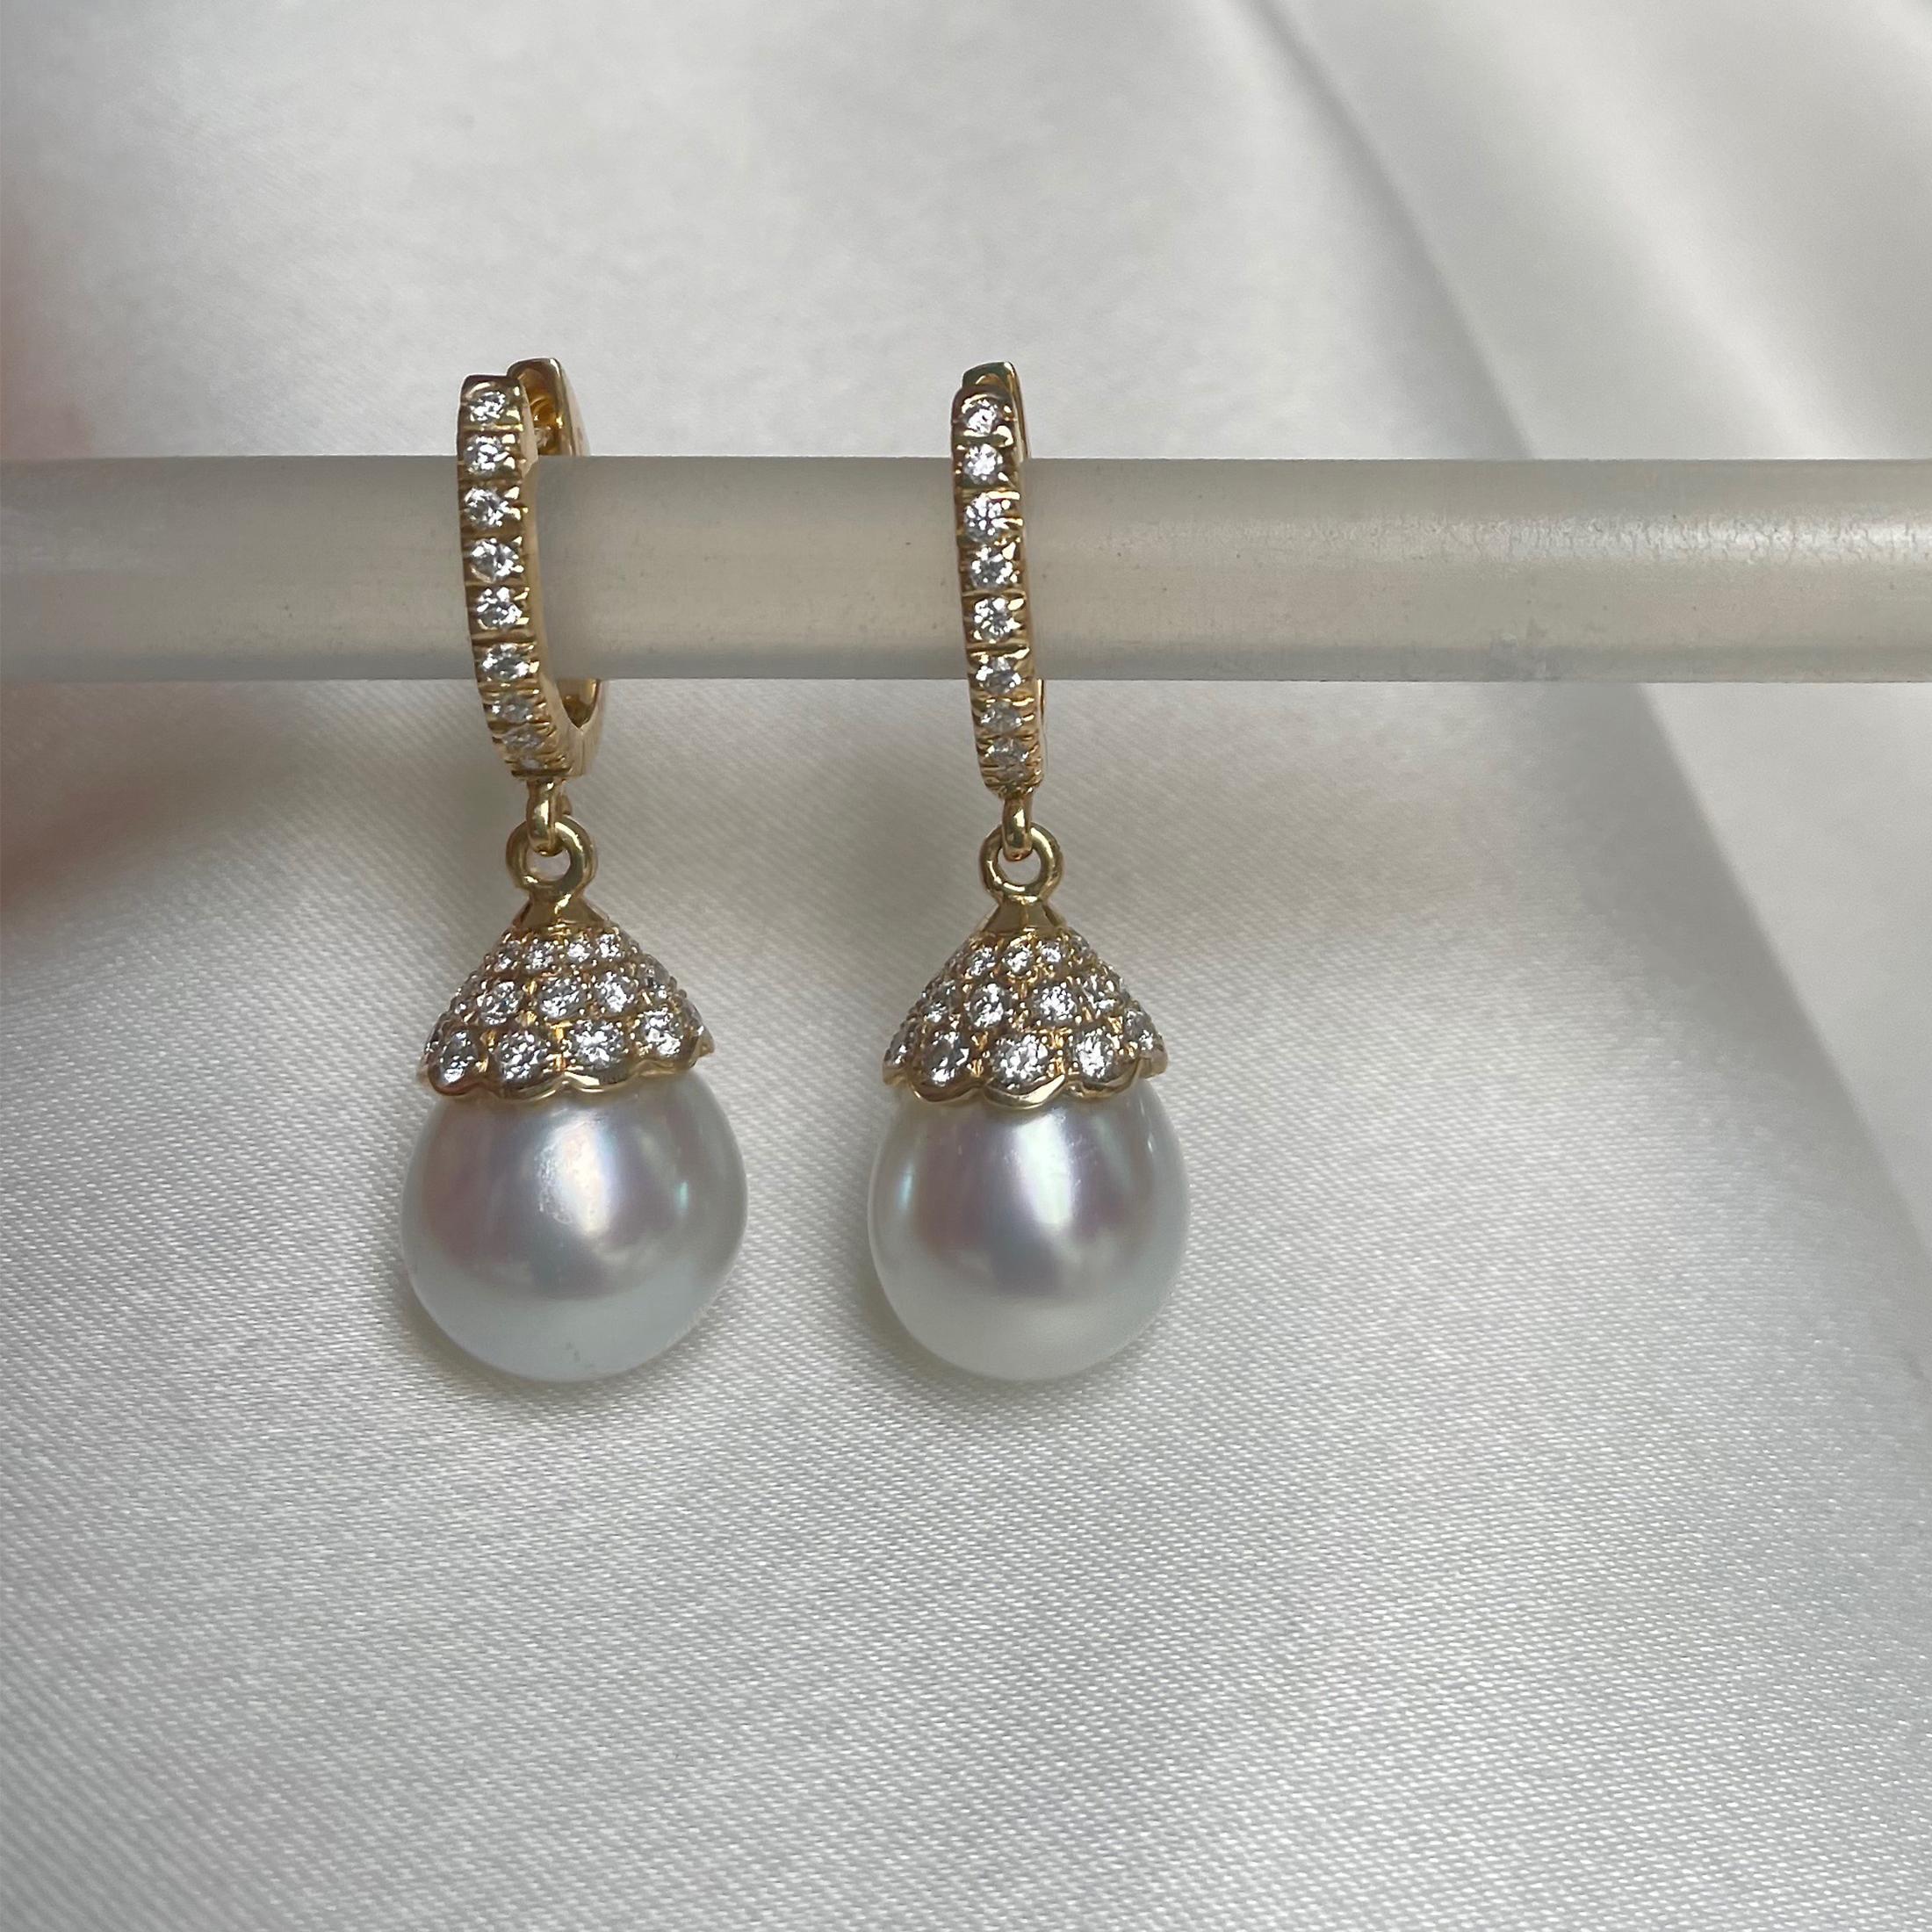 Absolutely lovely is the only way to describe these earrings.  Light weigh, beautiful white south sea pearls, luscious gold patina and accented with diamonds.  Great for every day, elegant enough for evening, the definition of  wearable luxury.  